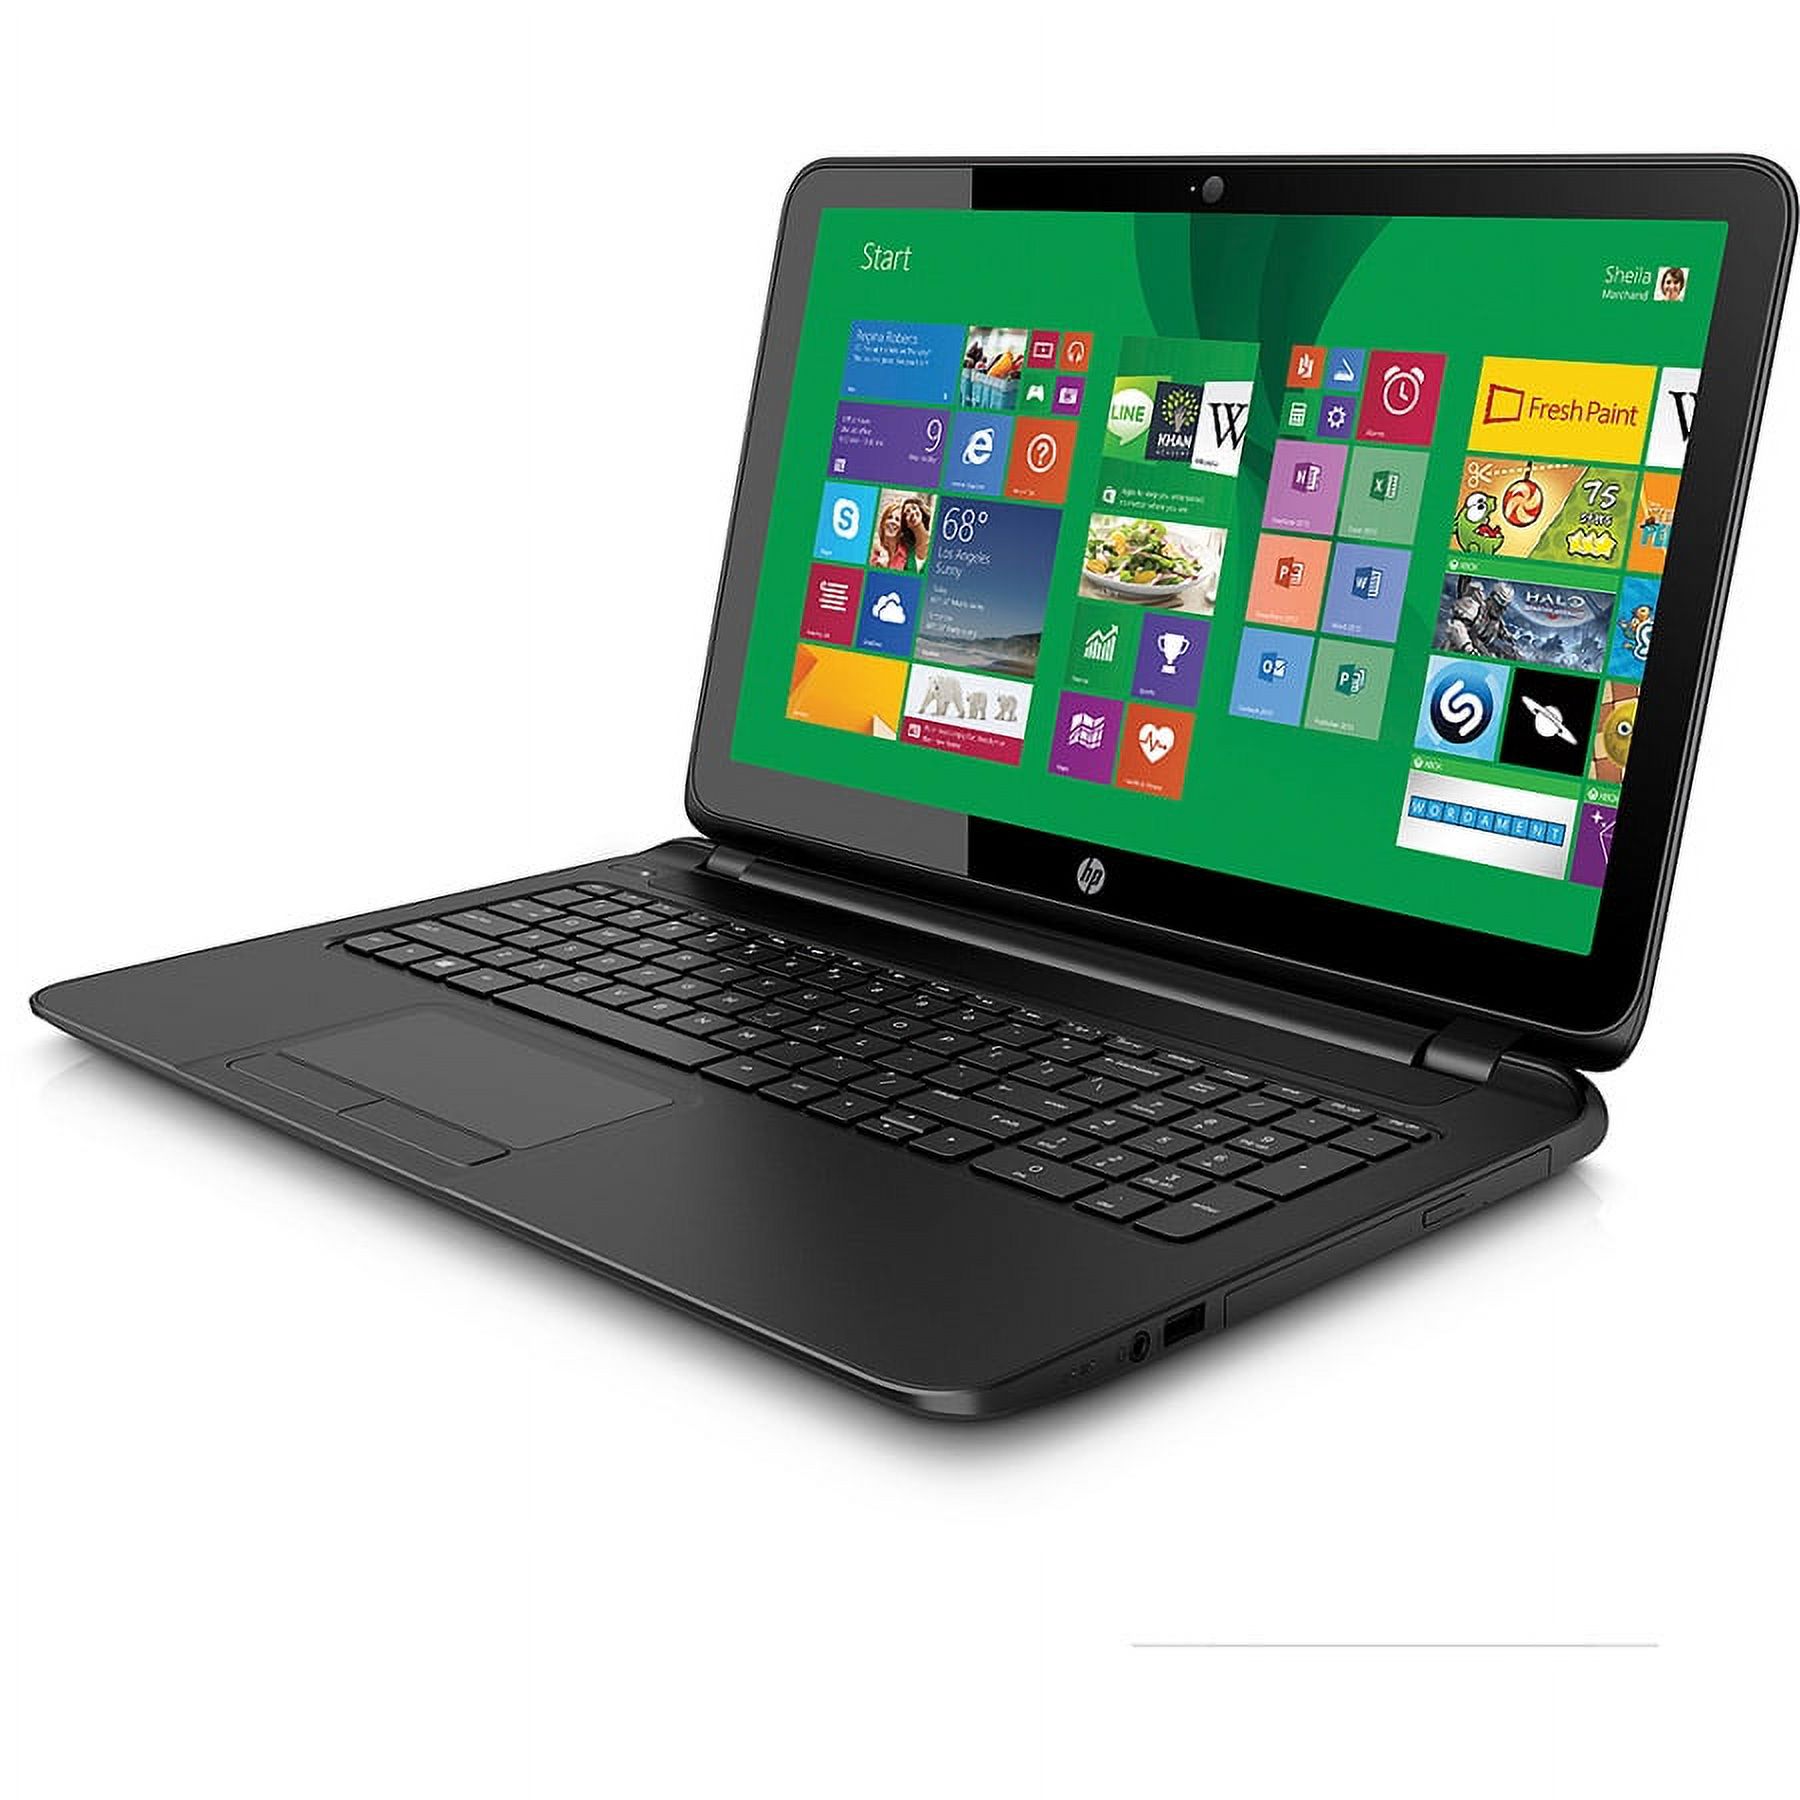 HP 15-F125WM Intel Celeron N2940 X4 1.83GHz 4GB 500GB DVD+/-RW 15.6" Win8.1, Black (Used) - image 3 of 4